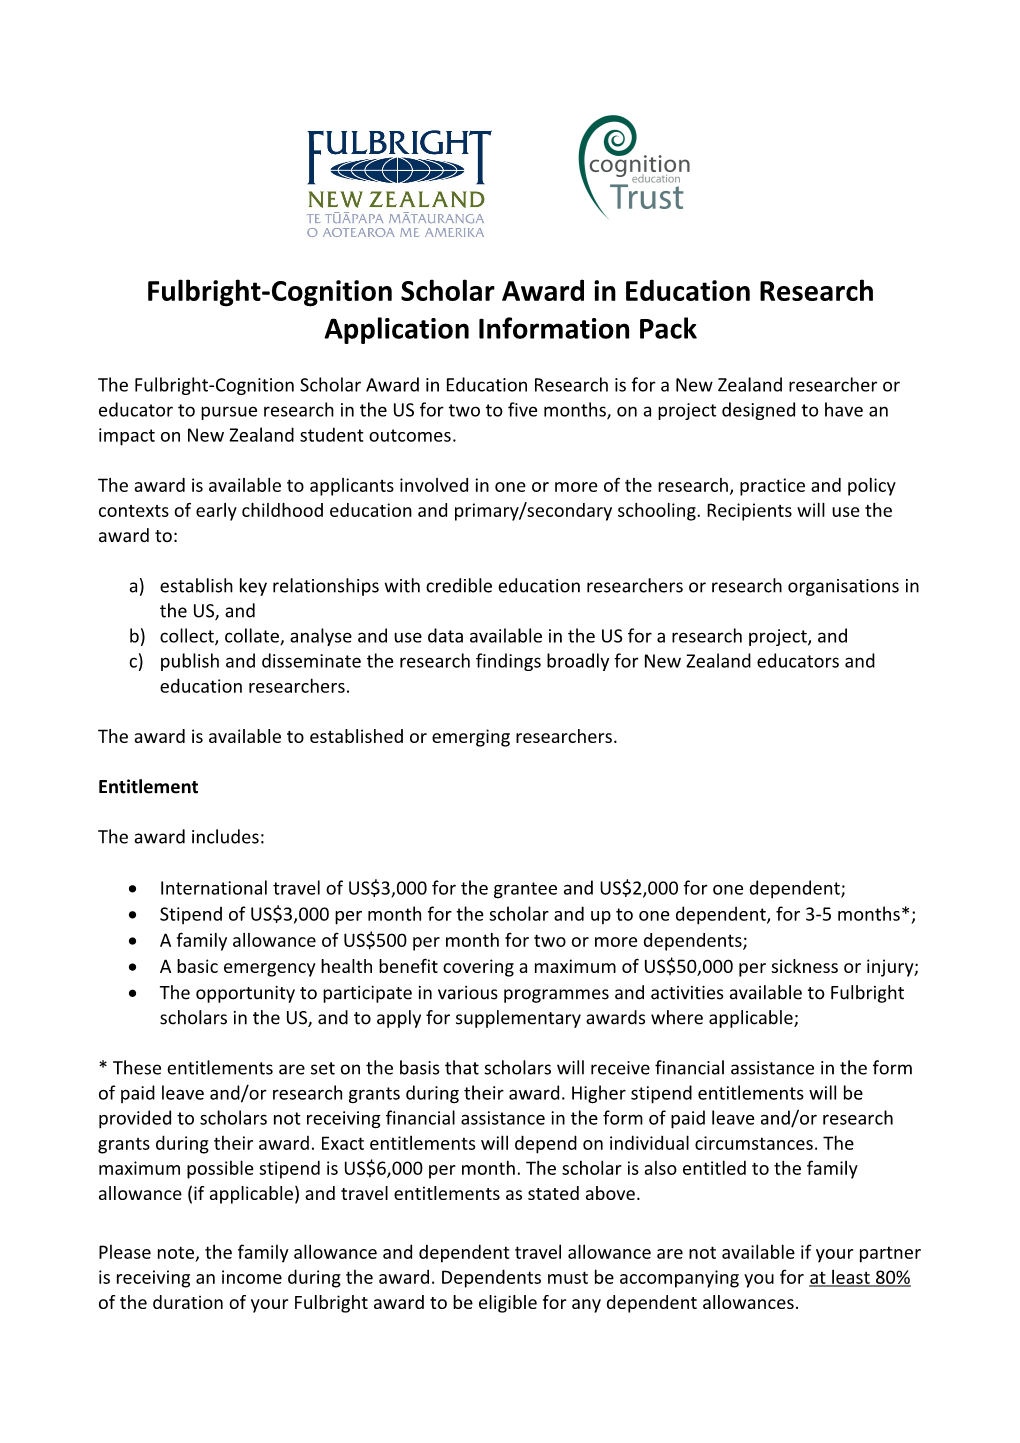 Fulbright-Cognition Scholar Award in Education Research